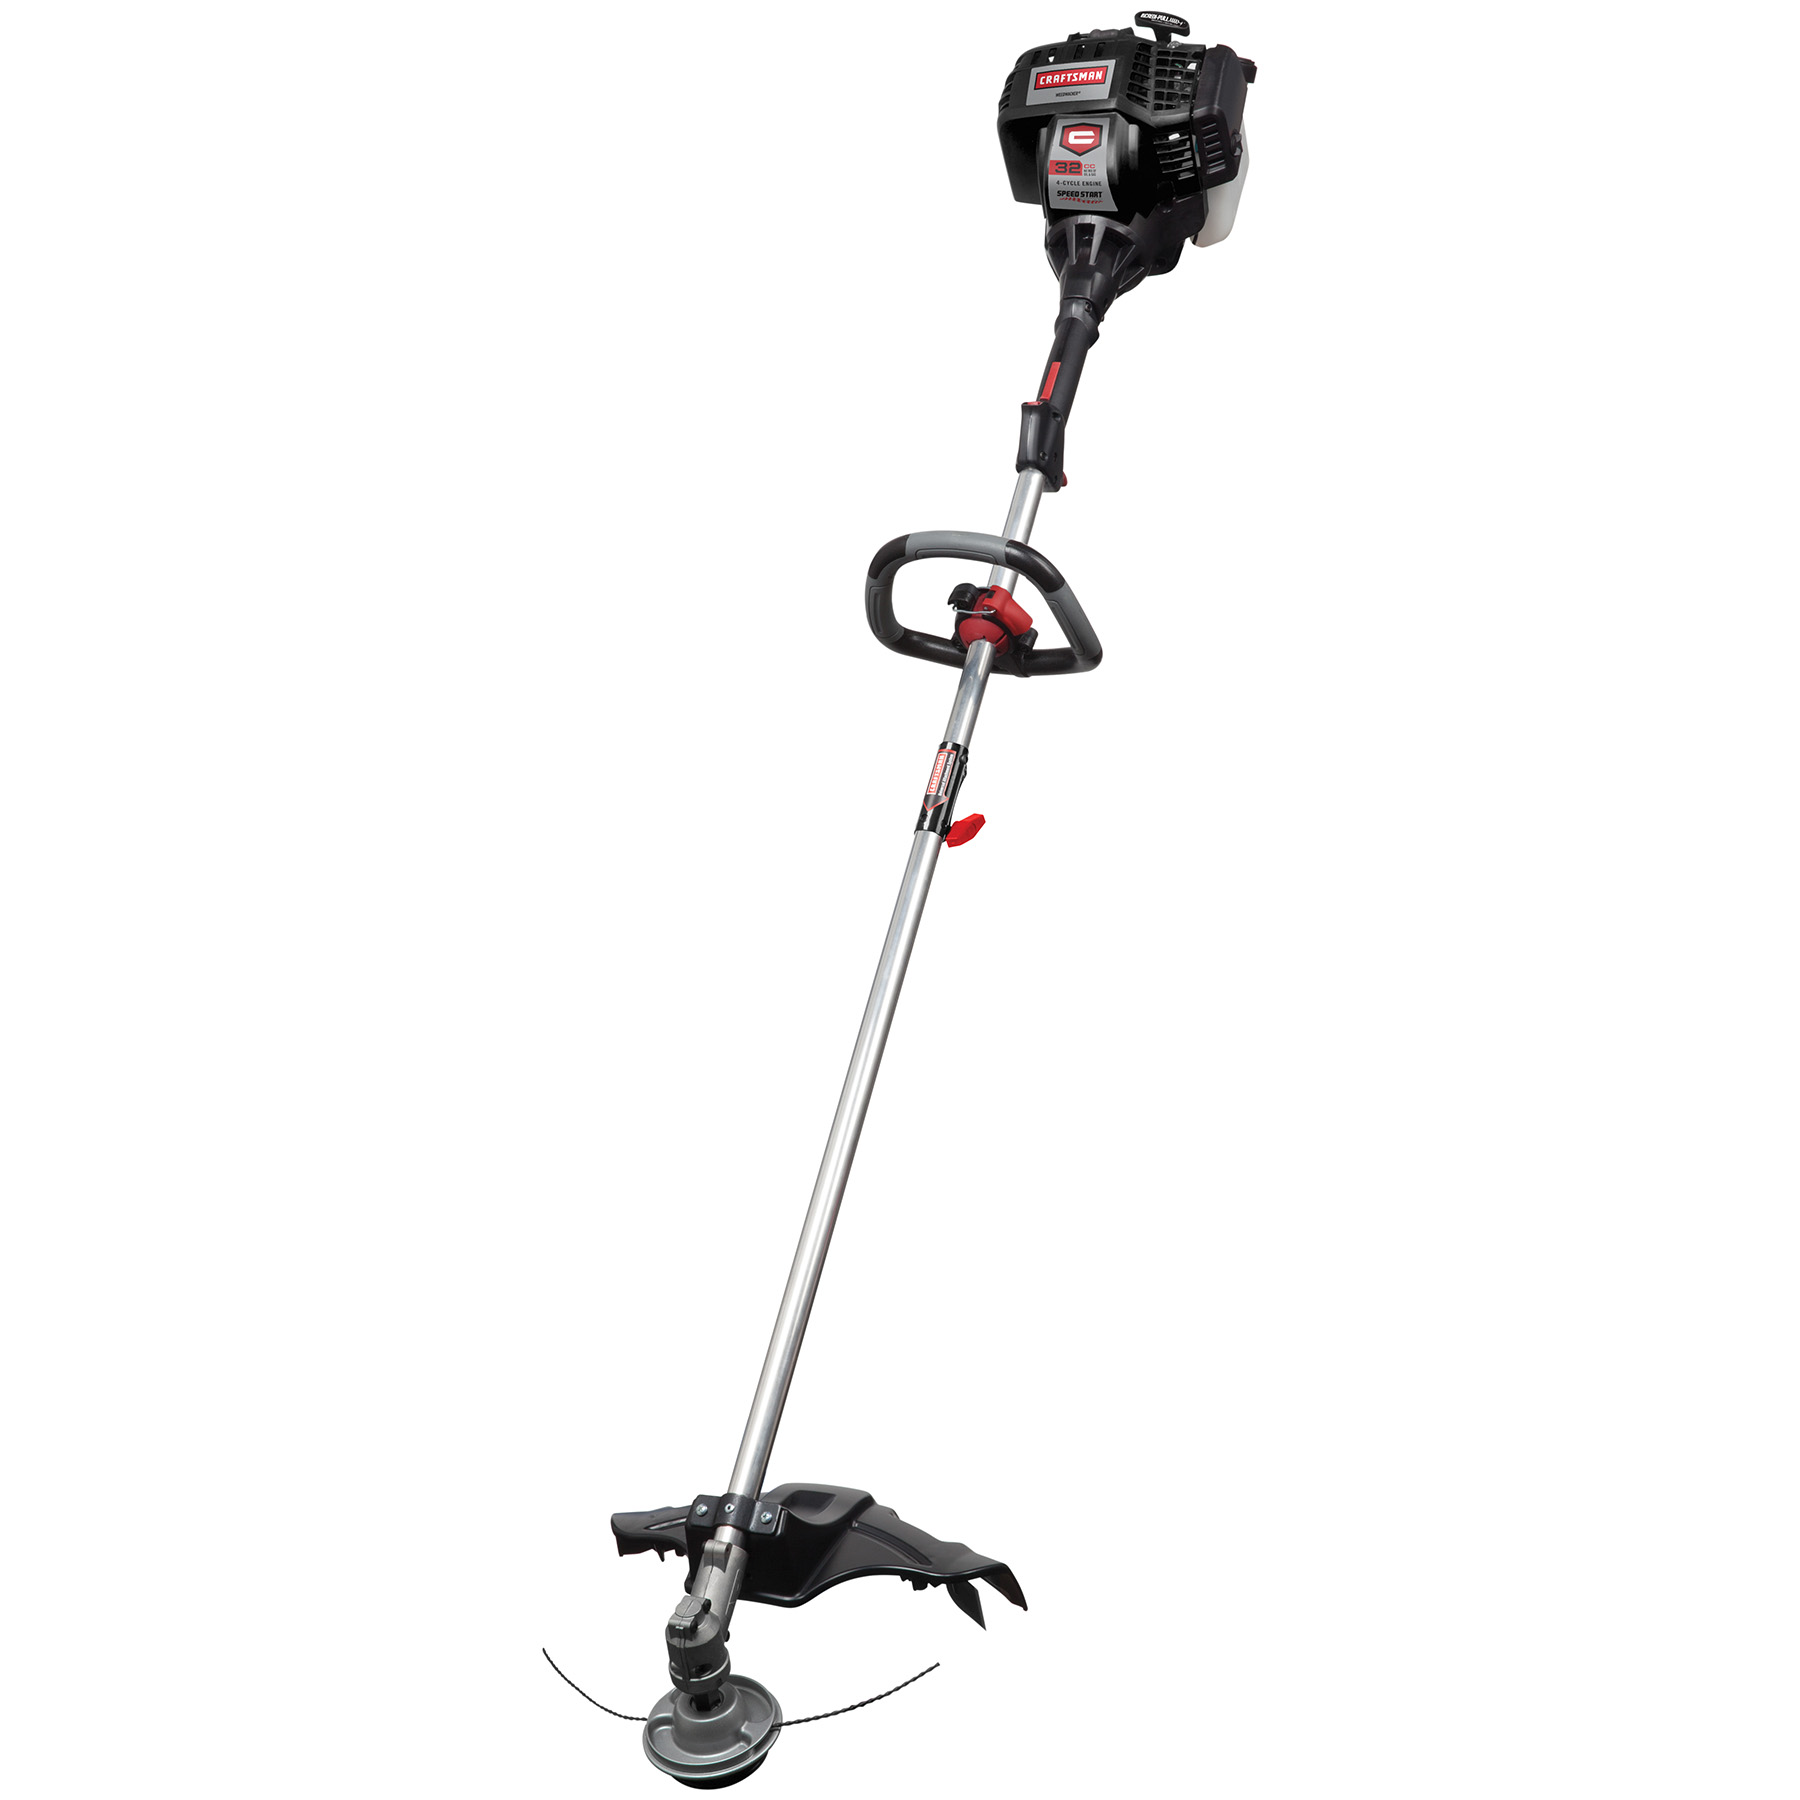 Craftsman 73193 32cc 4-Cycle Gas Trimmer